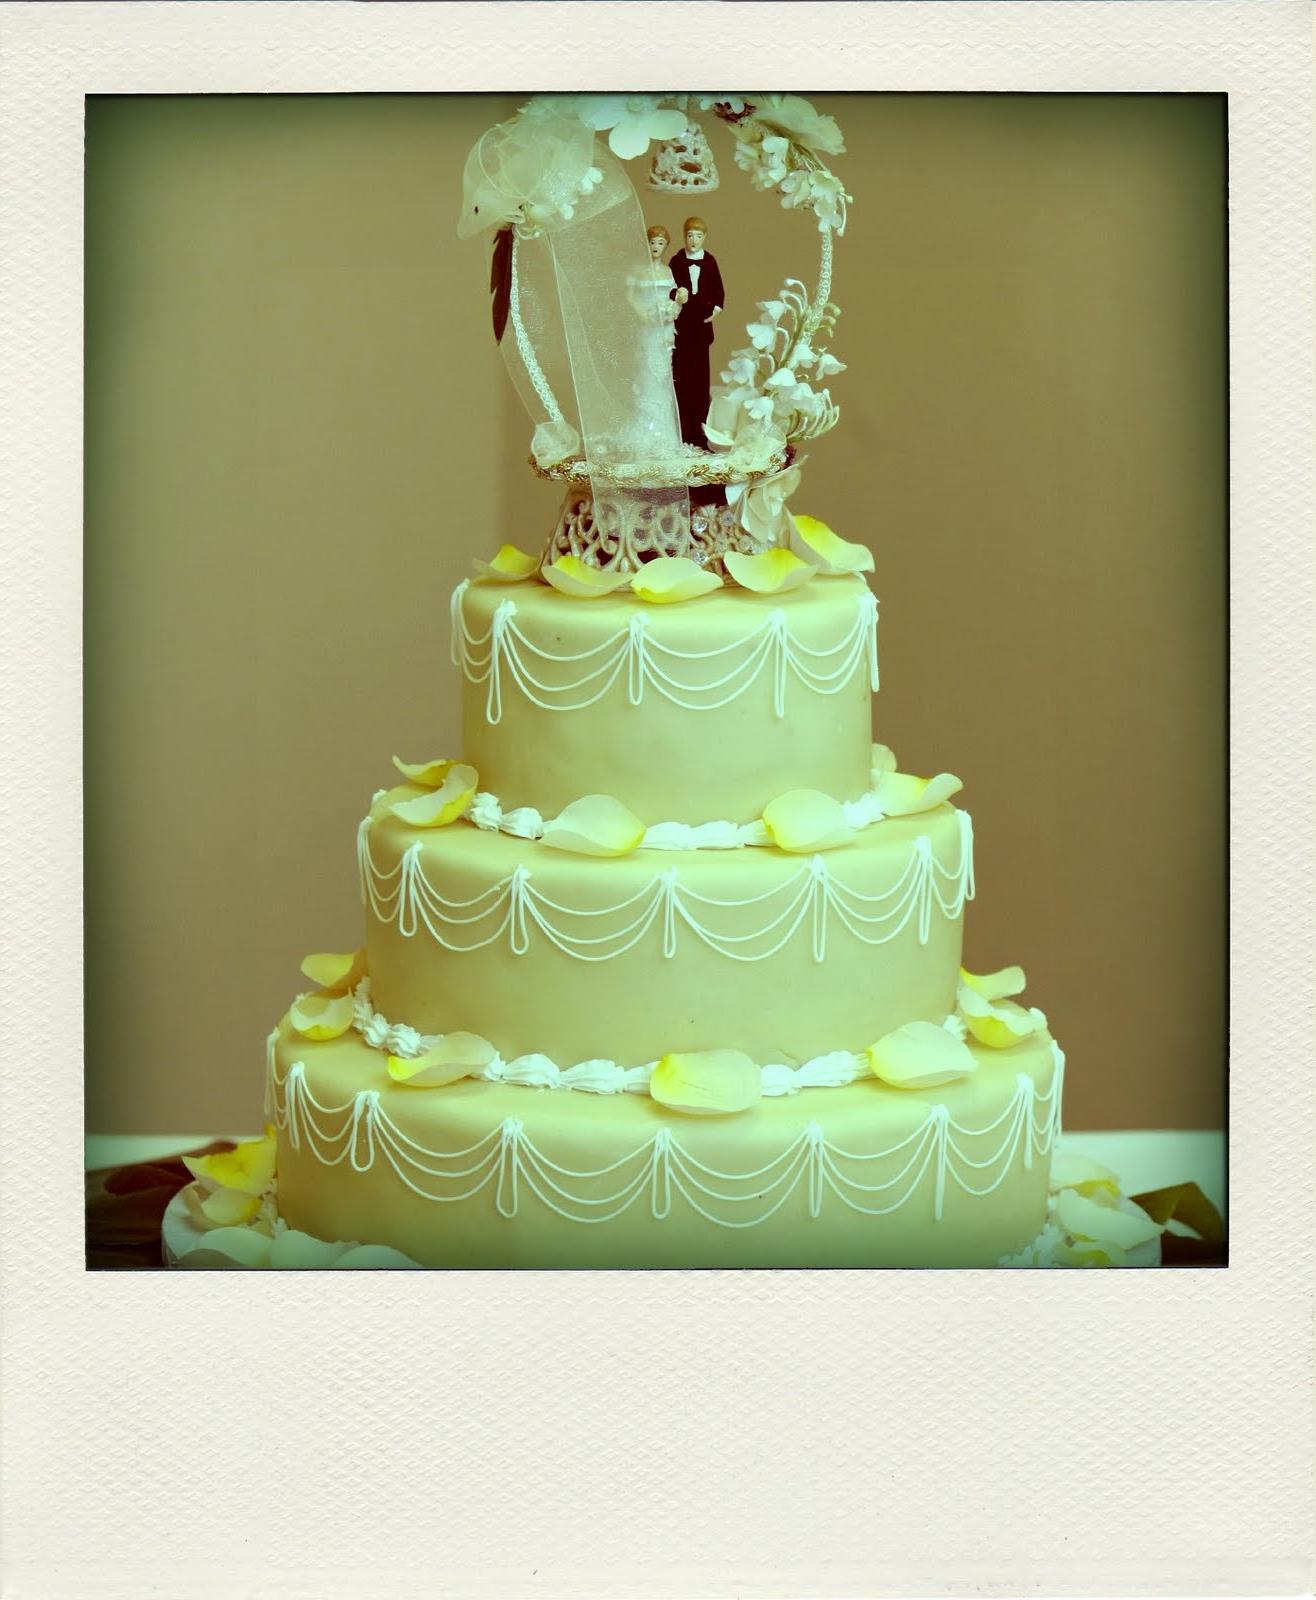 and was the best wedding cake